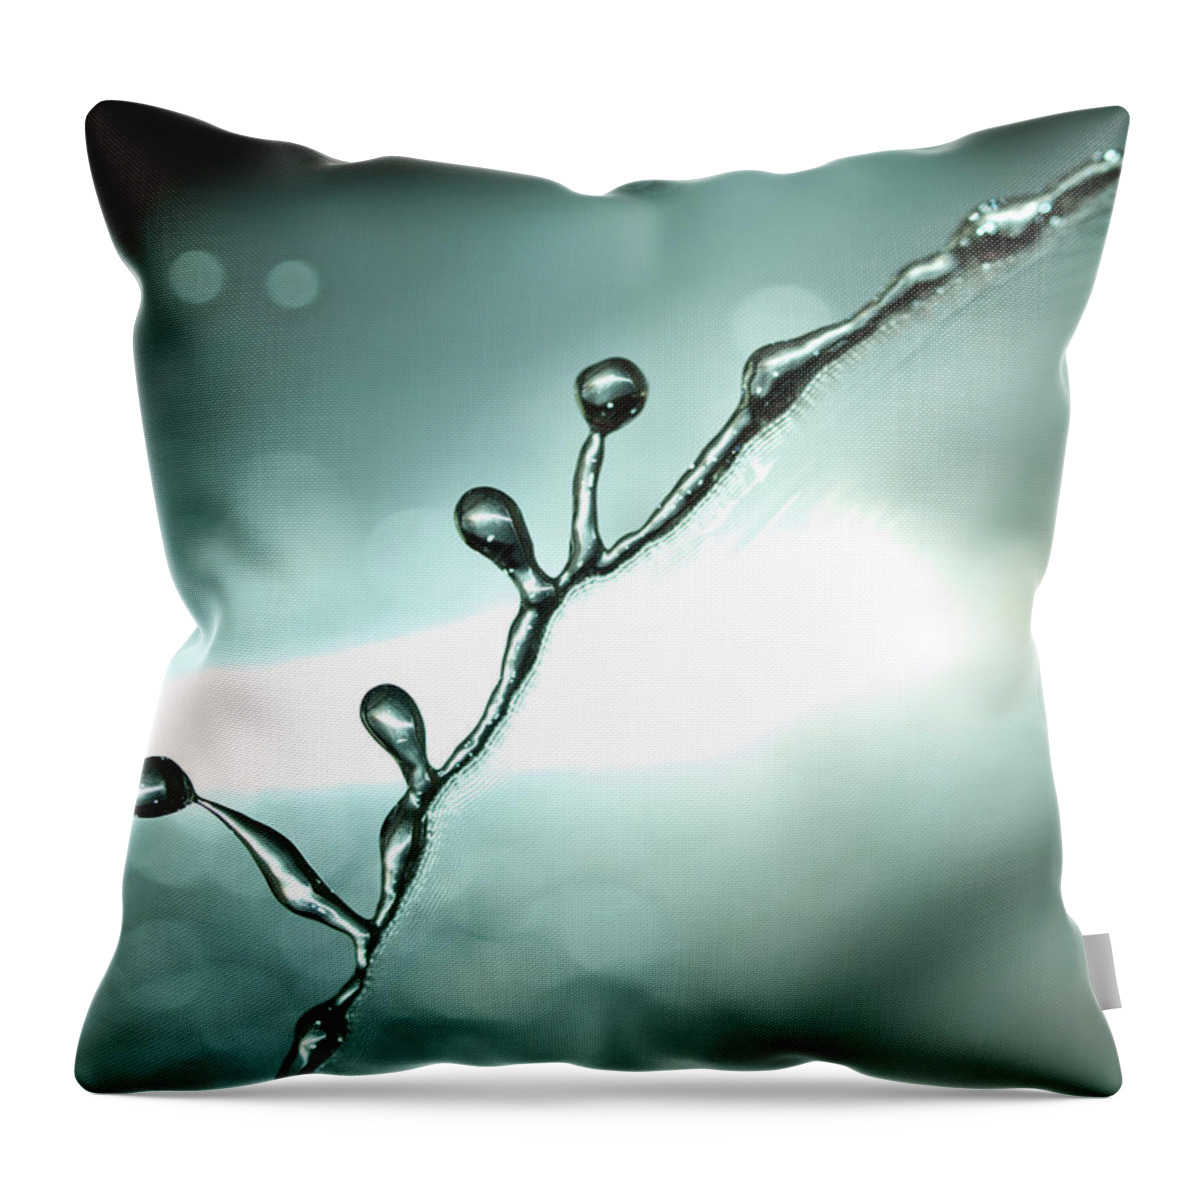 Purity Throw Pillow featuring the photograph Water Wave #1 by Portishead1